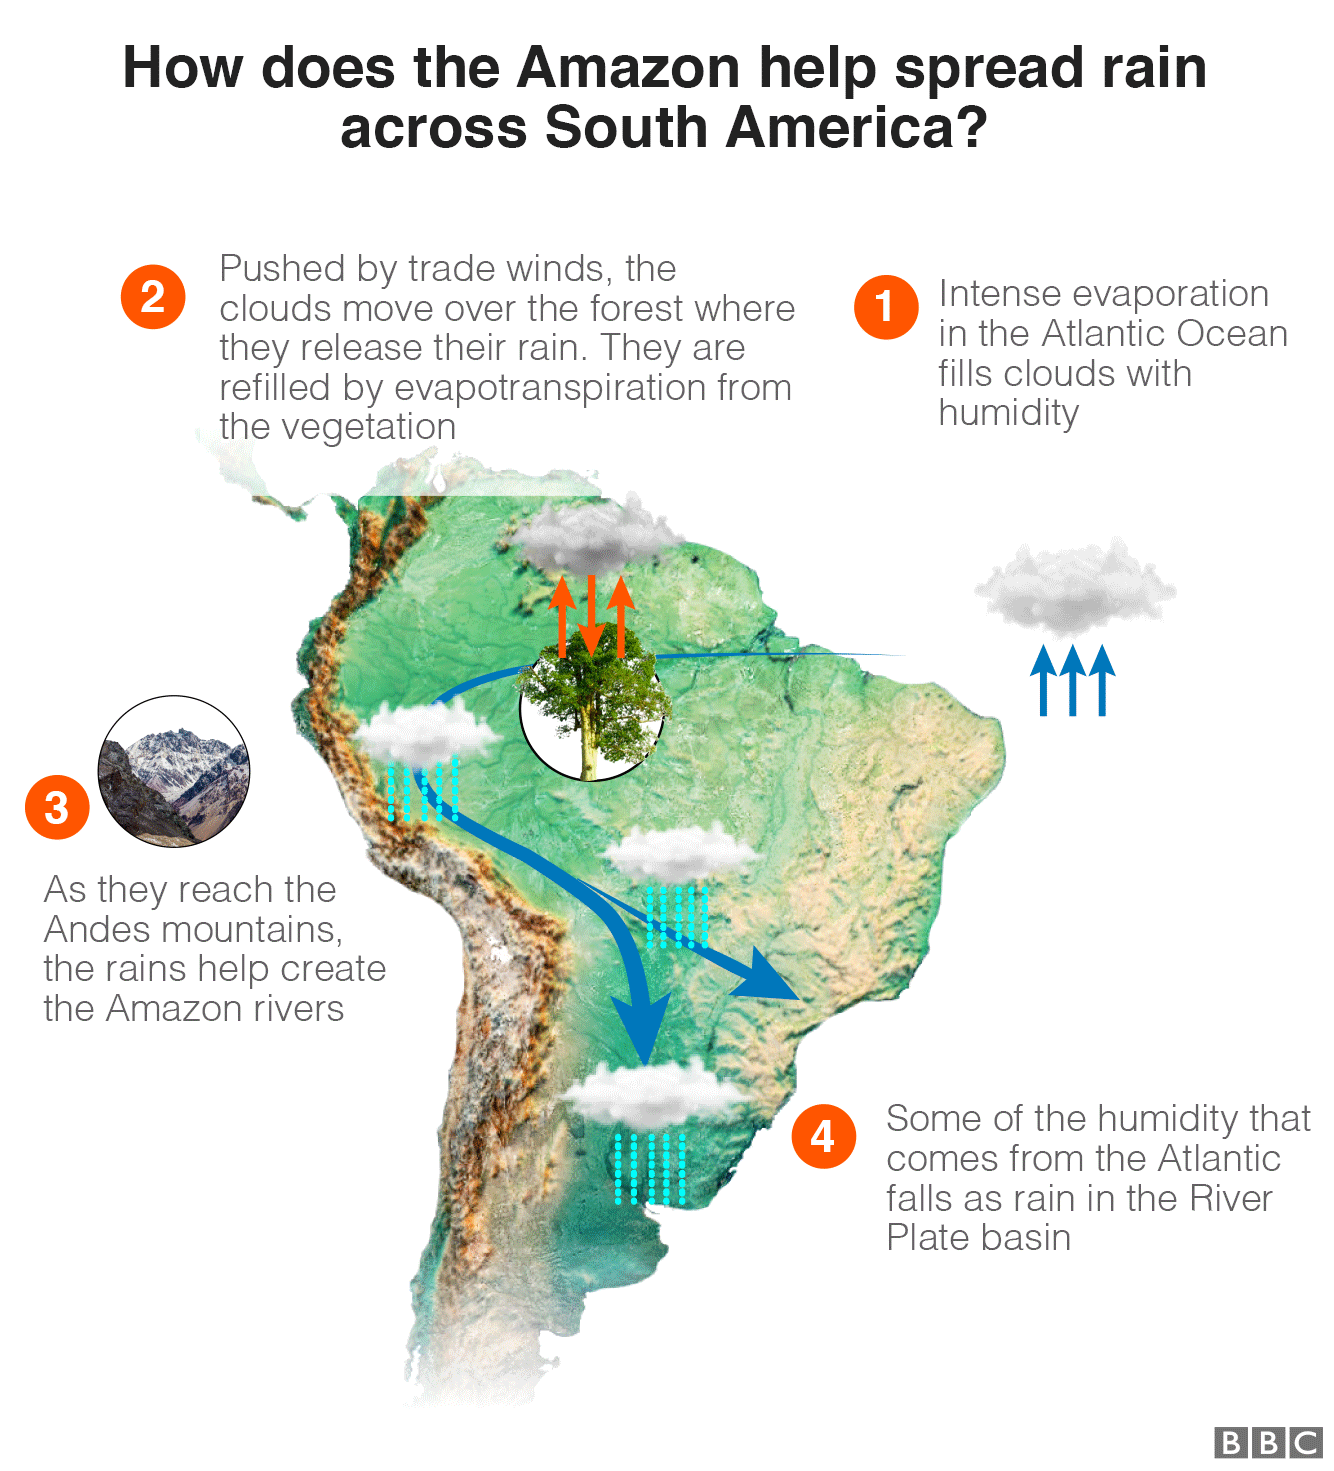 Graphic showing how the Amazon distributes rain around South America: 1: Intense evaporation in the Atlantic Ocean fills clouds with humidity 2: Pushed by trade winds, the clouds move over the forest where they release their rain. They are refilled by evapotranspiration from the vegetation 3: As they reach the mountains, the rains help create the Amazon rivers, 4: Some of the humidity that comes from the Atlantic falls as rain in the River Plate basin